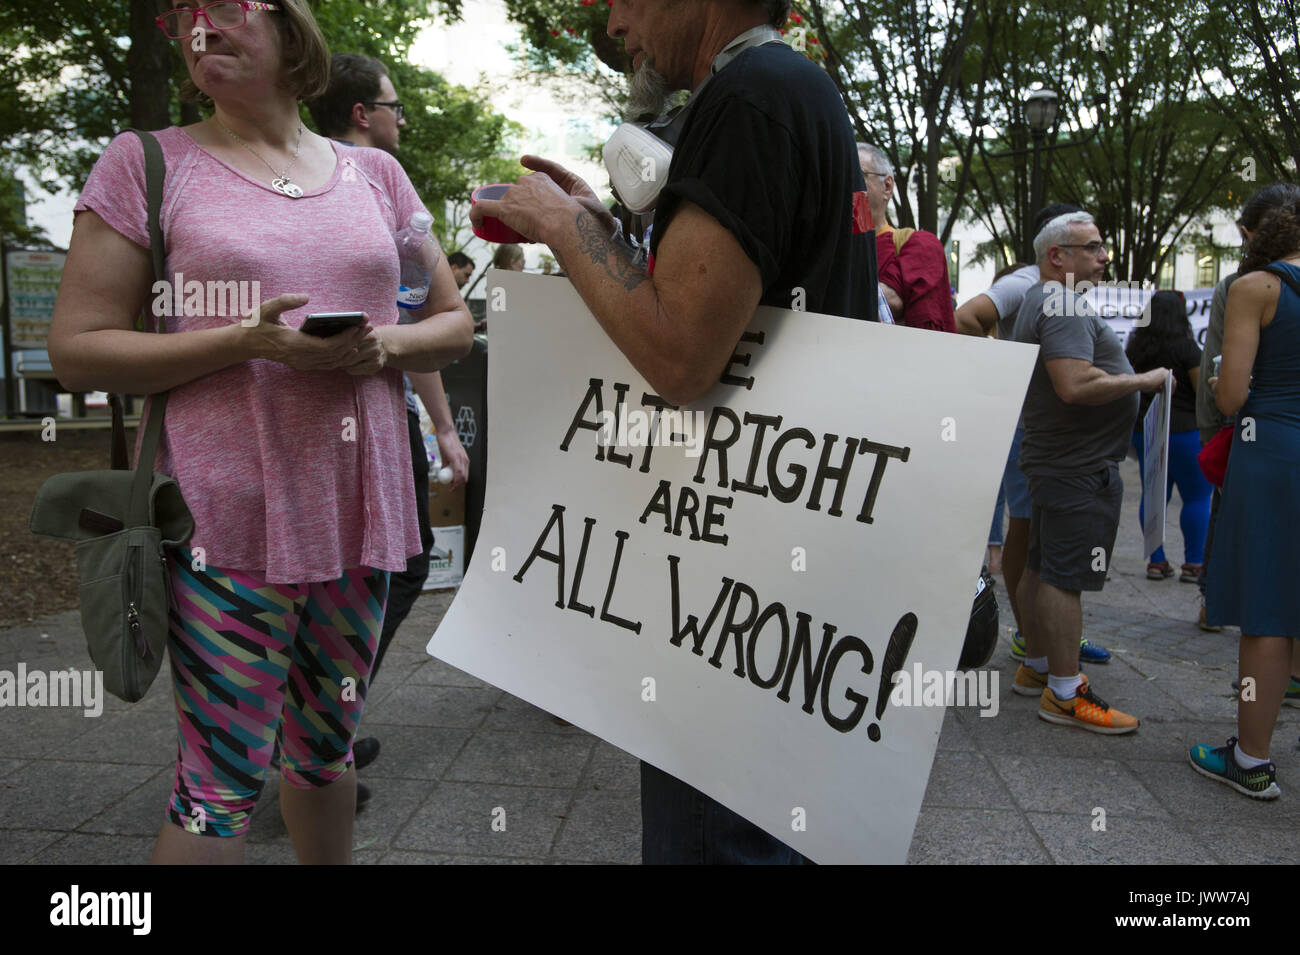 Atlanta, GA, USA. 13th Aug, 2017. Anti-Fascist protestors gather in downtown Atlanta and march along Peachtree Street, showing their support of those who demonstrated against white supremacist group in Charlottesville, VA. Rally organized by Antifa, an organization nationally that fights fascism.Pictured: Gathering of several hundred to demonstrate anger at Charlottesville VA tragedy. Credit: Robin Rayne Nelson/ZUMA Wire/Alamy Live News Stock Photo